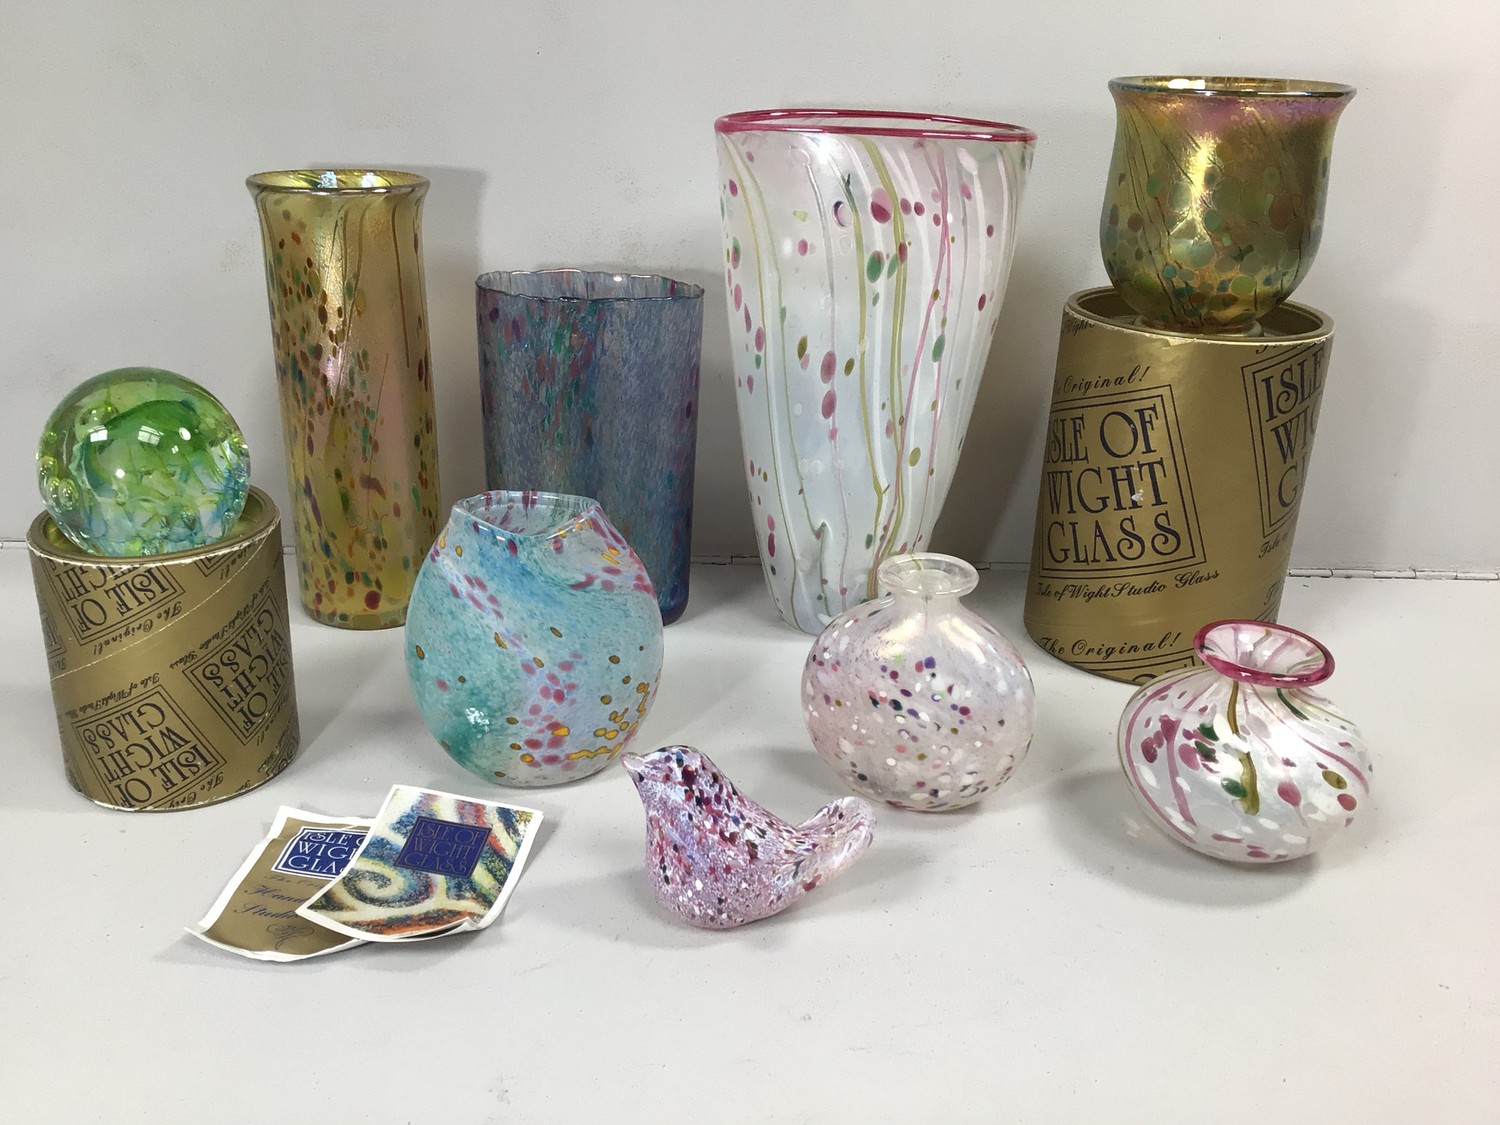 Five various Isle of Wight studio glass vases, together with an Isle of Wight glass bird